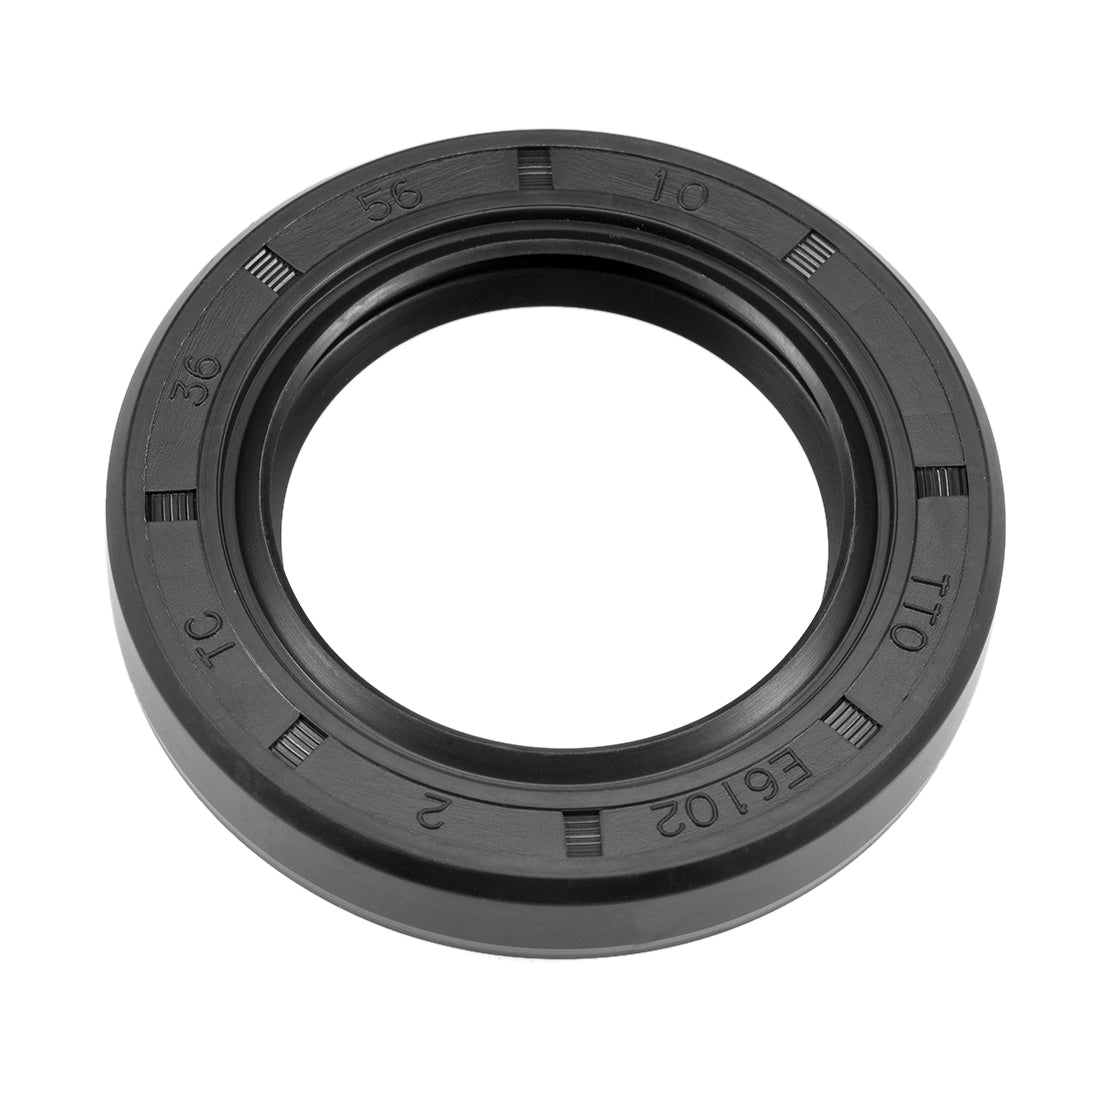 Uxcell Uxcell Oil Seal, TC 36mm x 56mm x 10mm, Nitrile Rubber Cover Double Lip